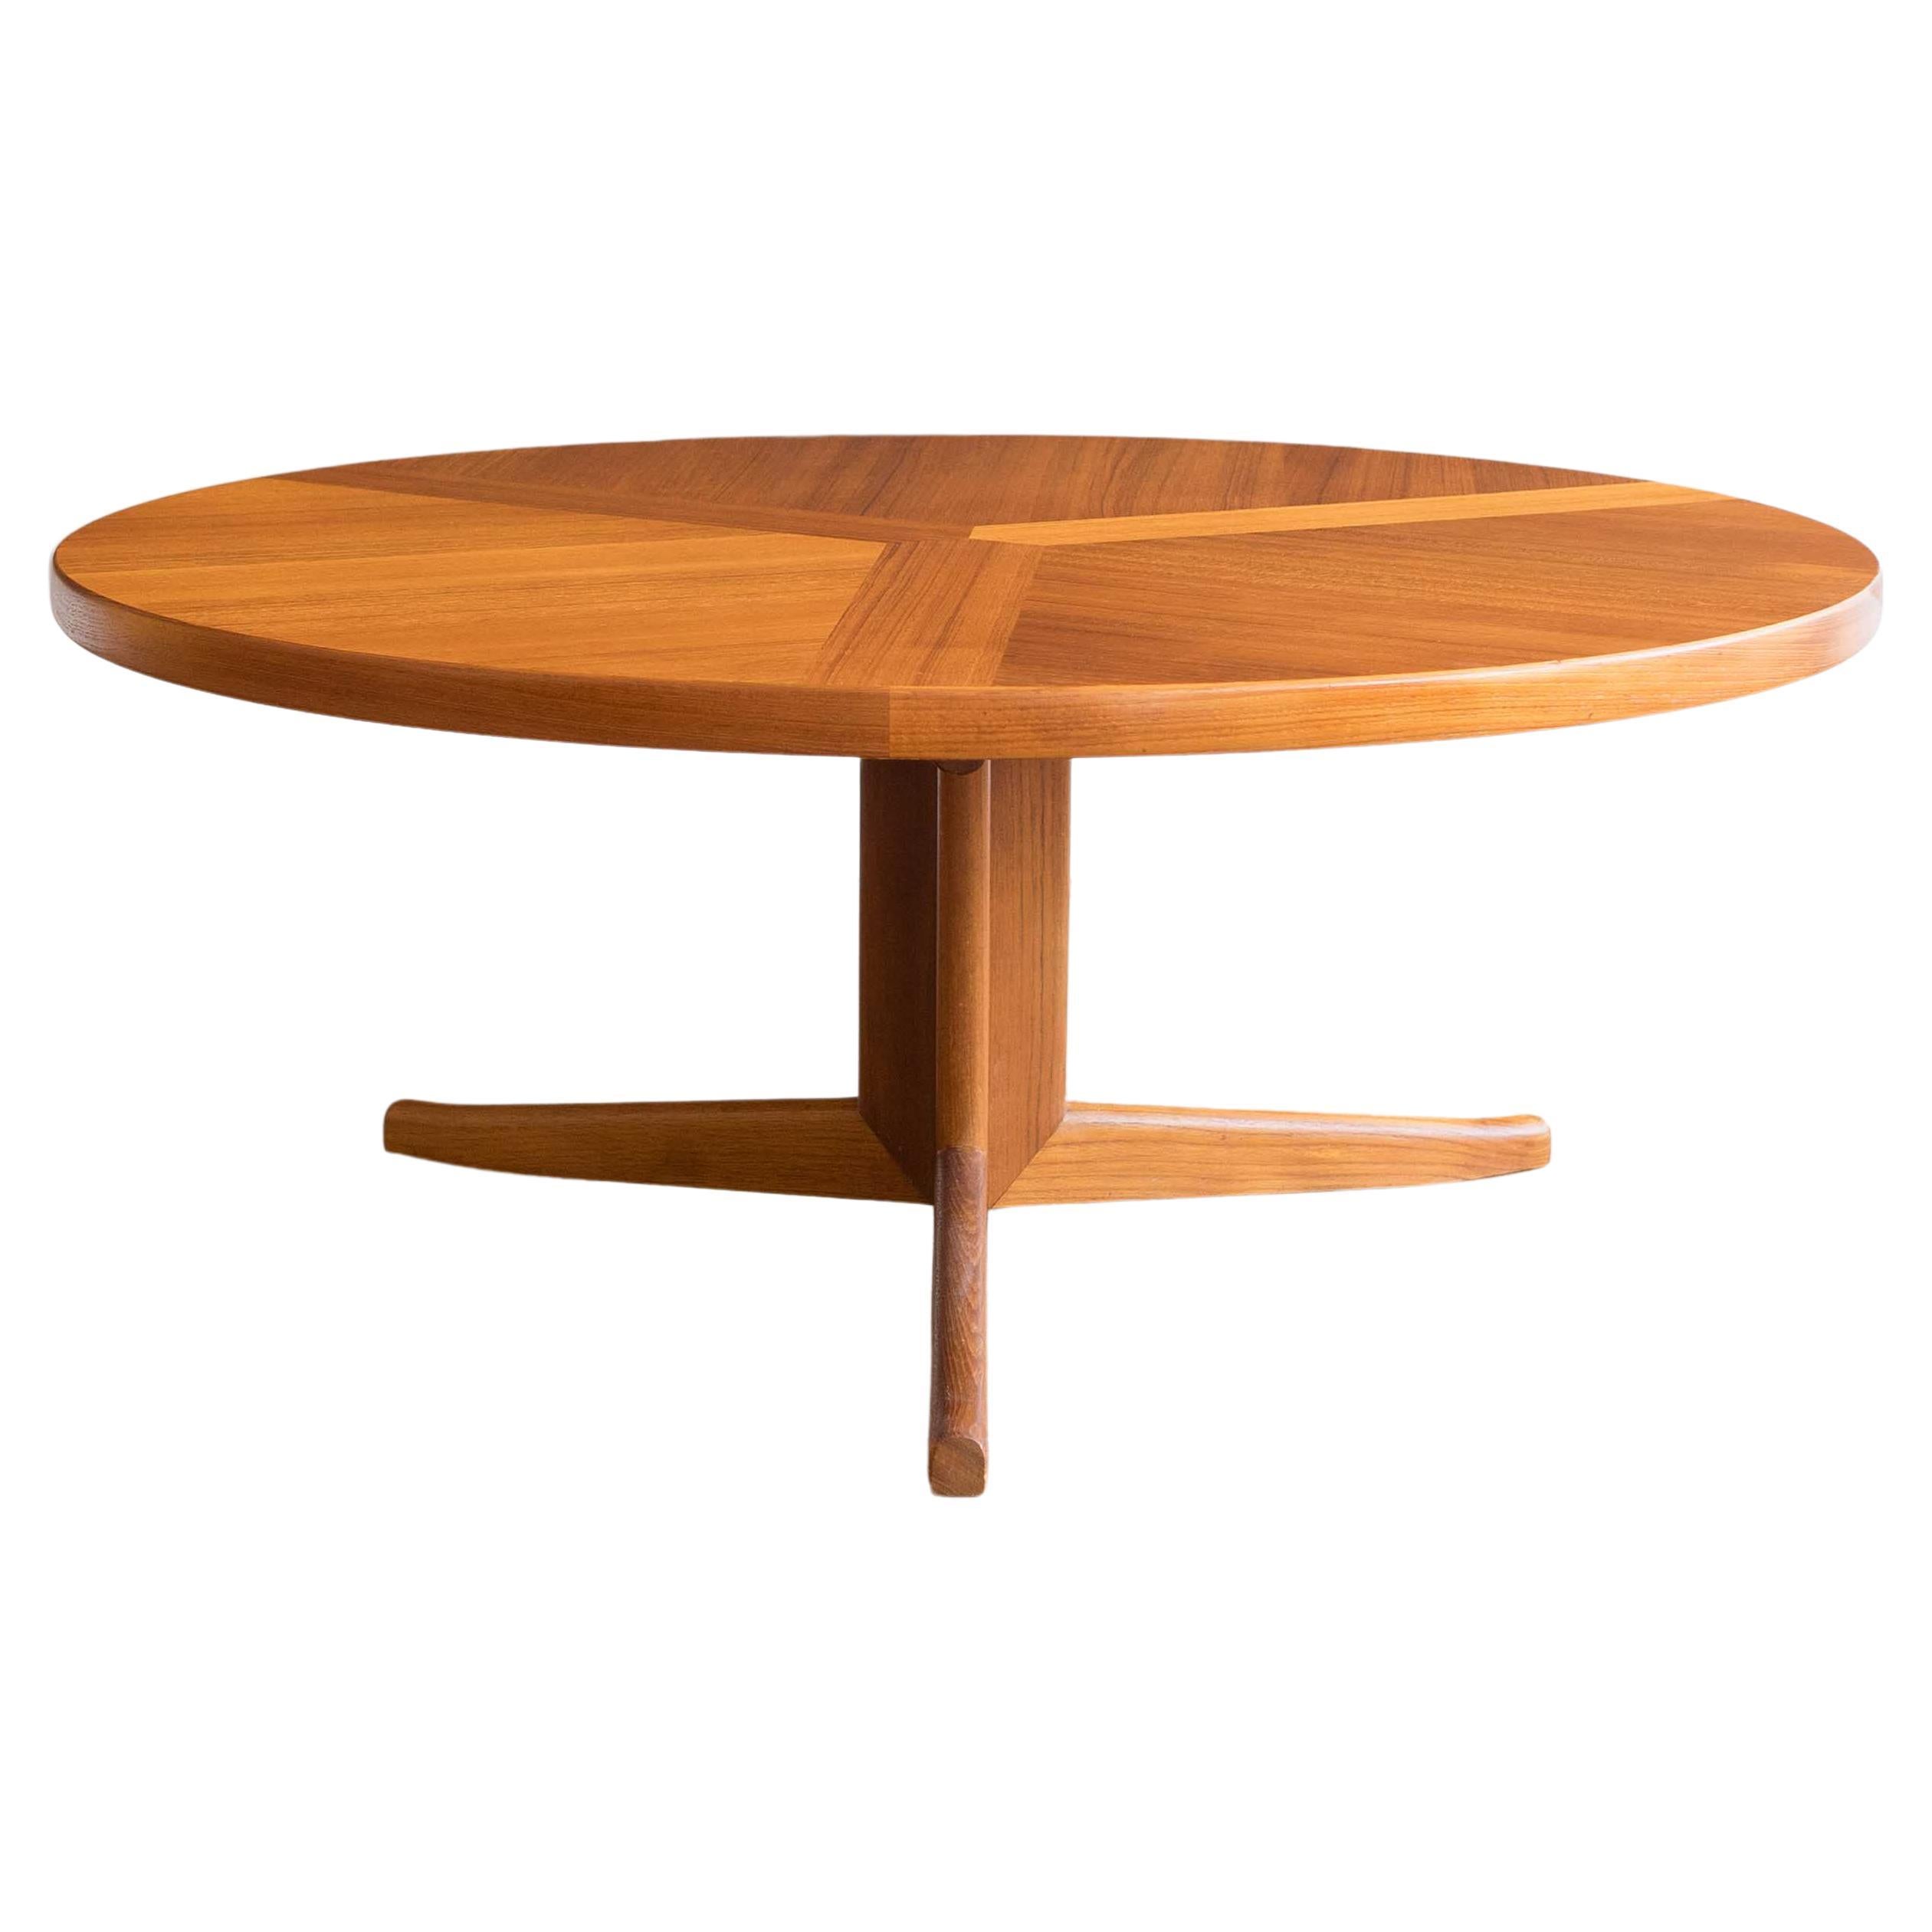 Vintage Mid Century Danish Teak Round Coffee Table with Floating Pedestal Base For Sale